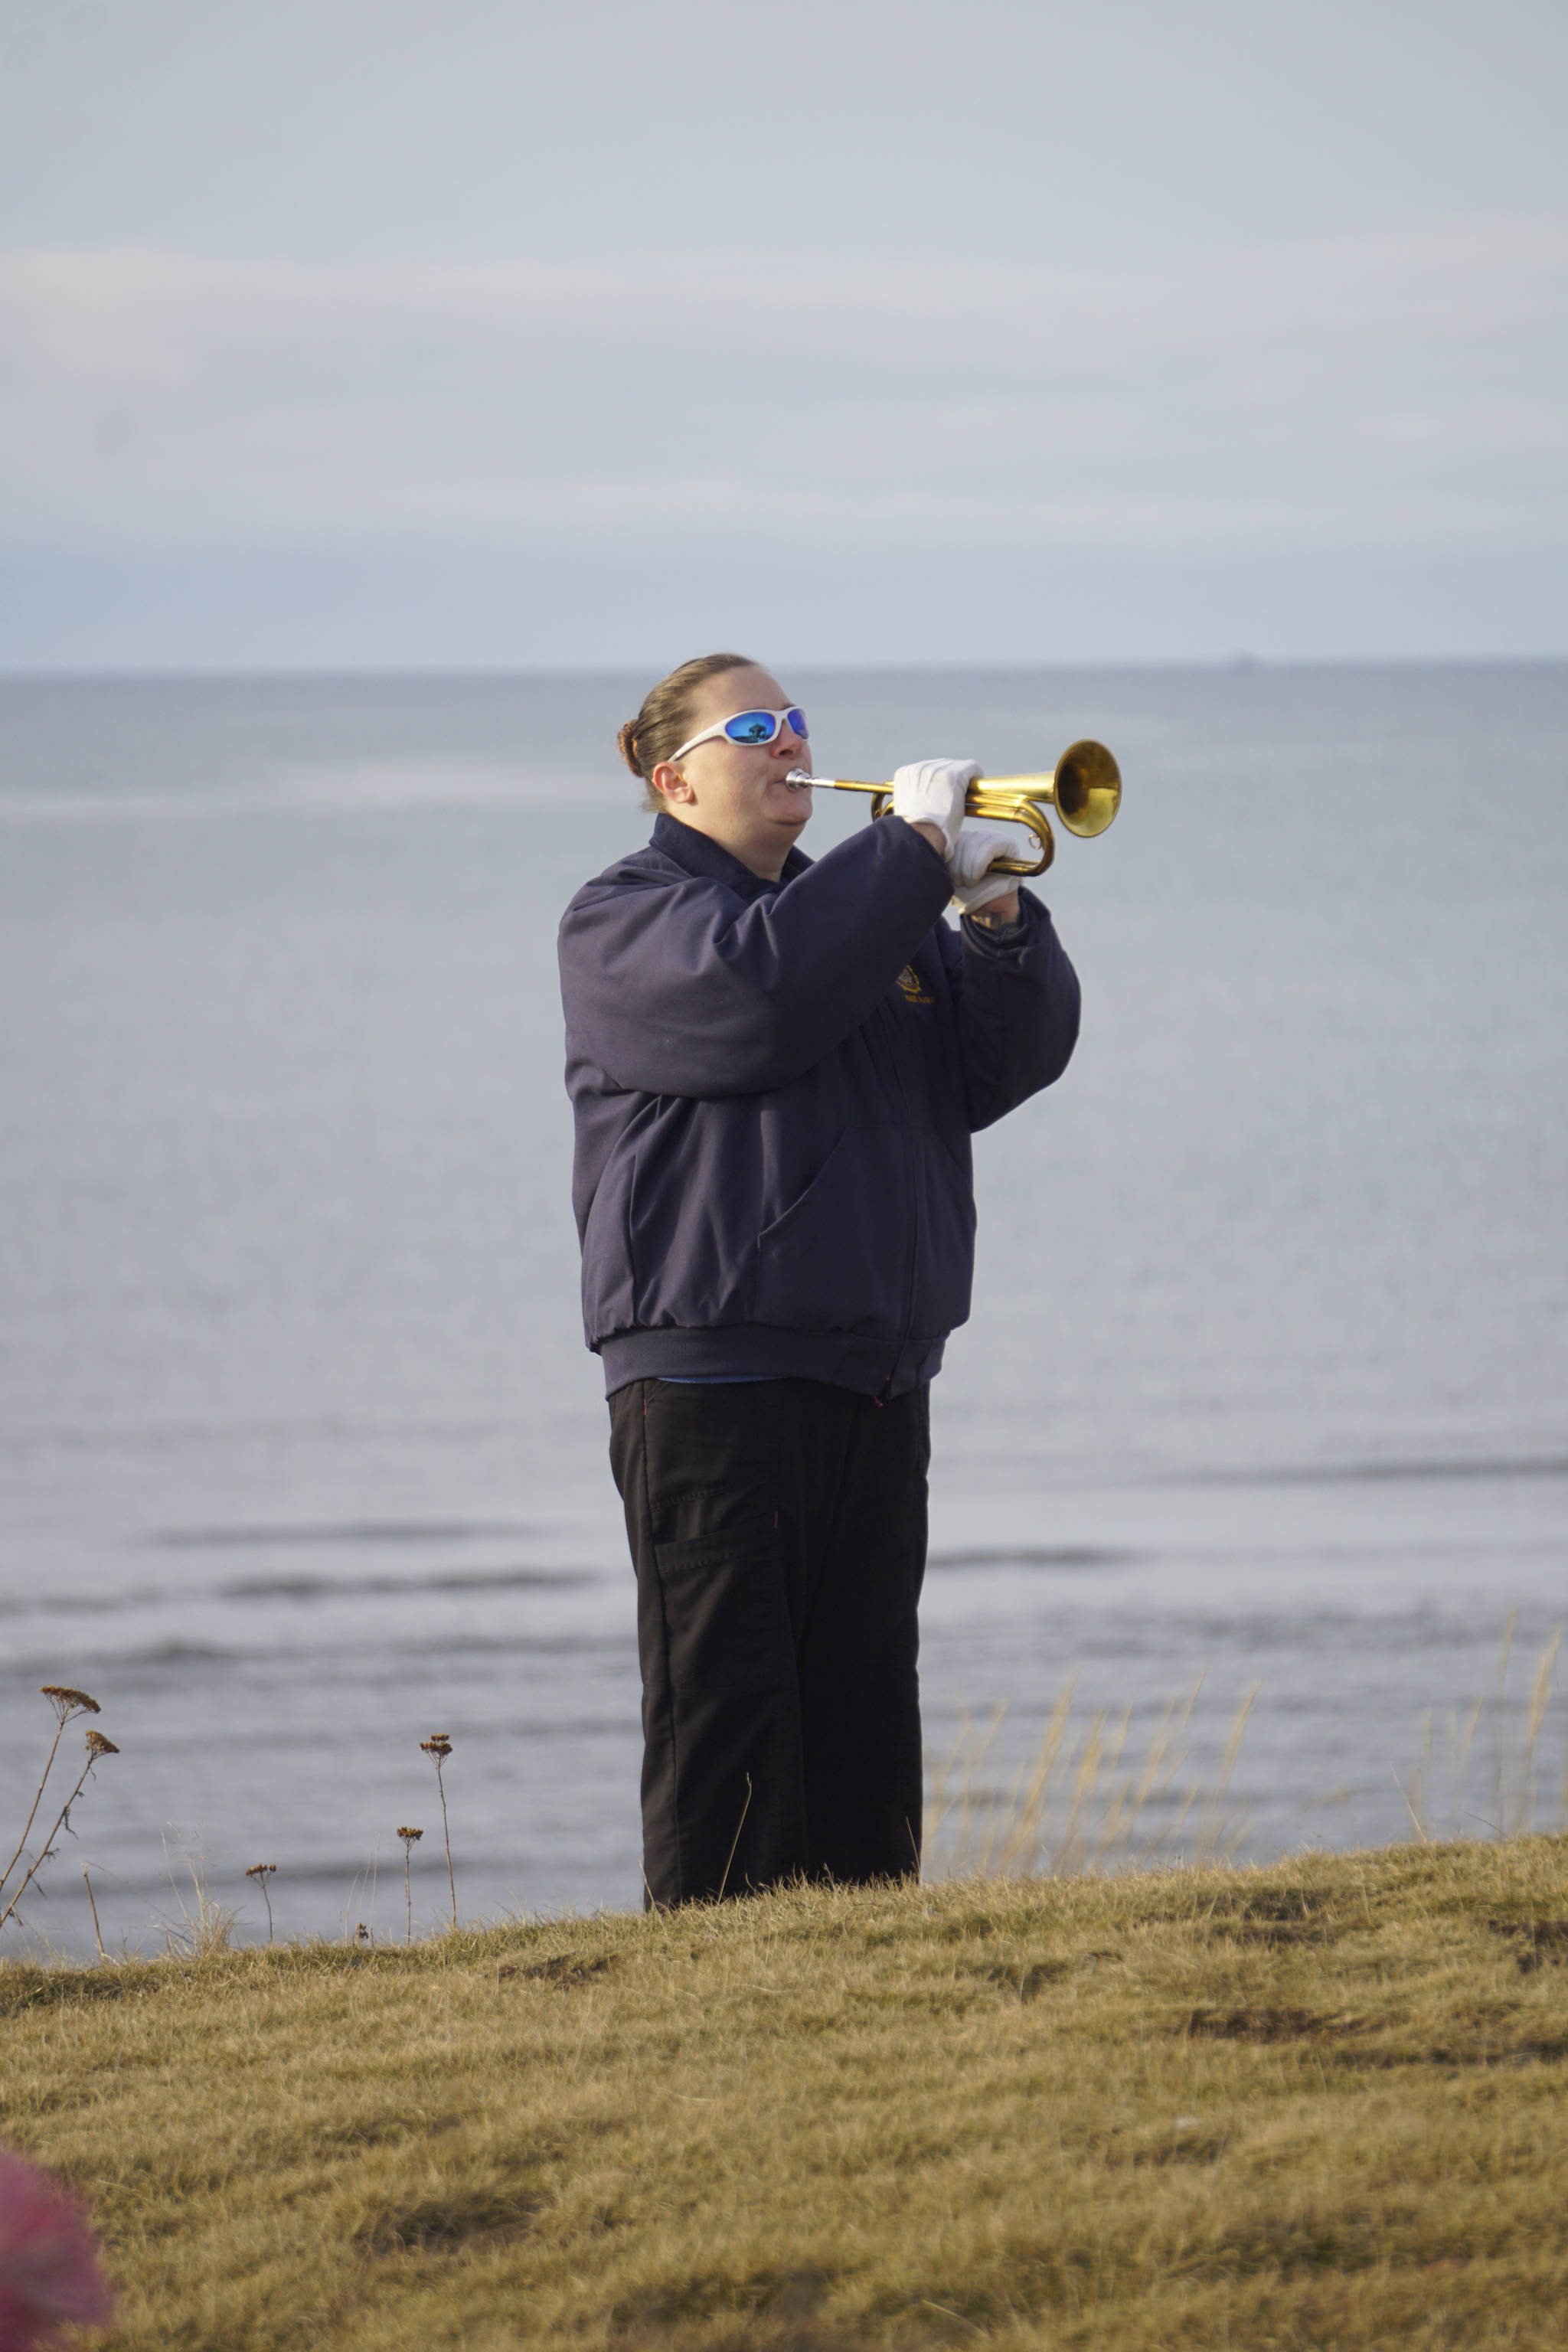 Cristy Hill plays “Taps” at a memorial service for Chief Warrant Officer Michael Kozloski on Friday morning, Feb. 8, 2019, at the Seafarer’s Memorial on the Homer Spit, Homer, Alaska. (Photo by Michael Armstrong/Homer News)